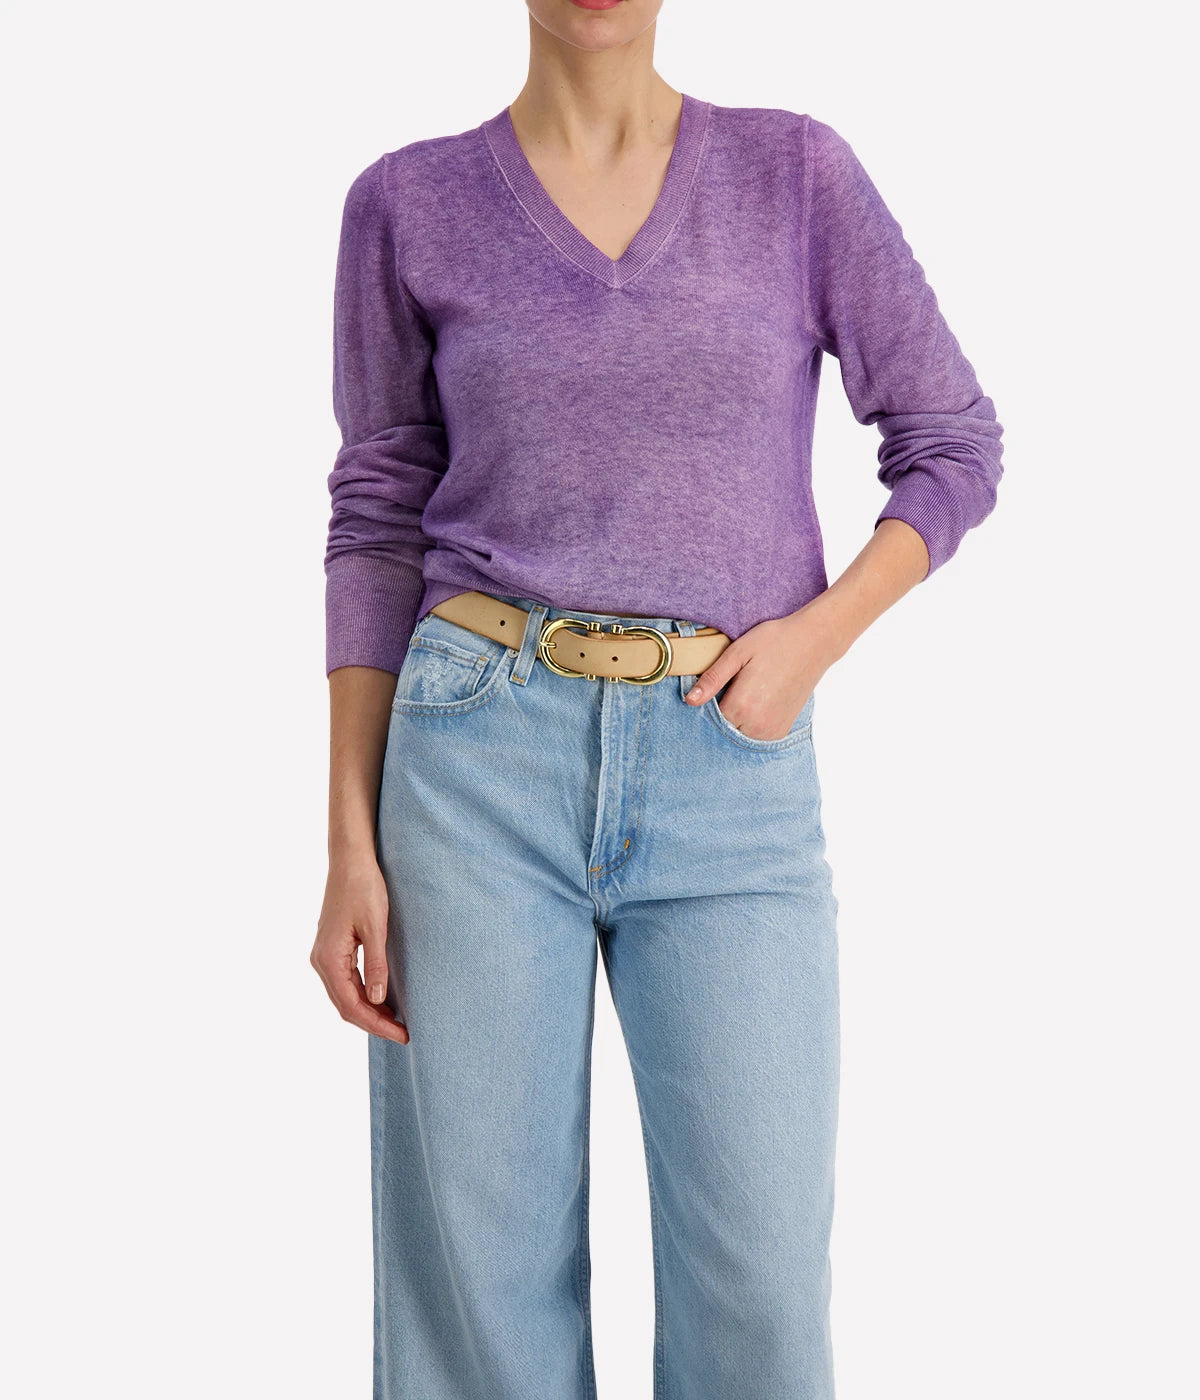 Purple V-Neck wool & cashmere lightweight long sleeve blend pullover by Avant Toi.